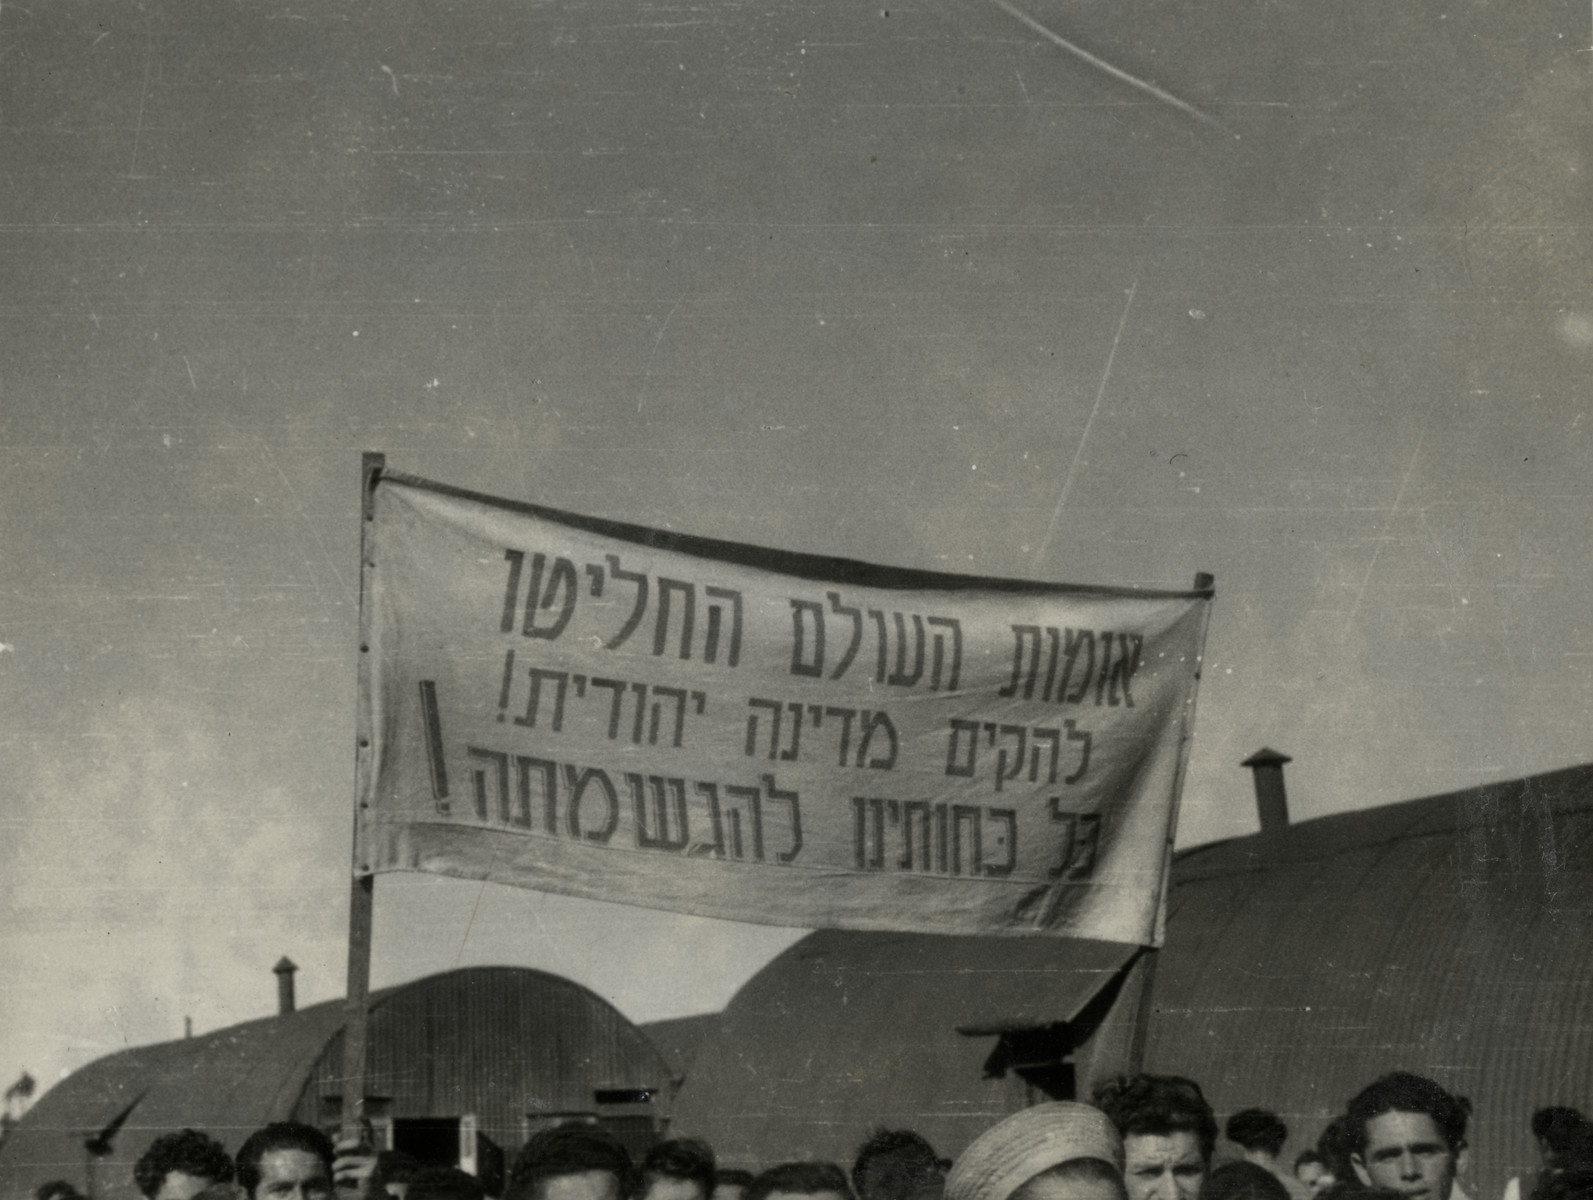 Refugees in Cyprus celebrate the United Nations Partition Plan for Palestine; the sign says that the U.N. decided to create a Jewish state. 

The banner reads "The nations of the world decided to establish a Jewish State.  All our strength is for fulfilling it!"